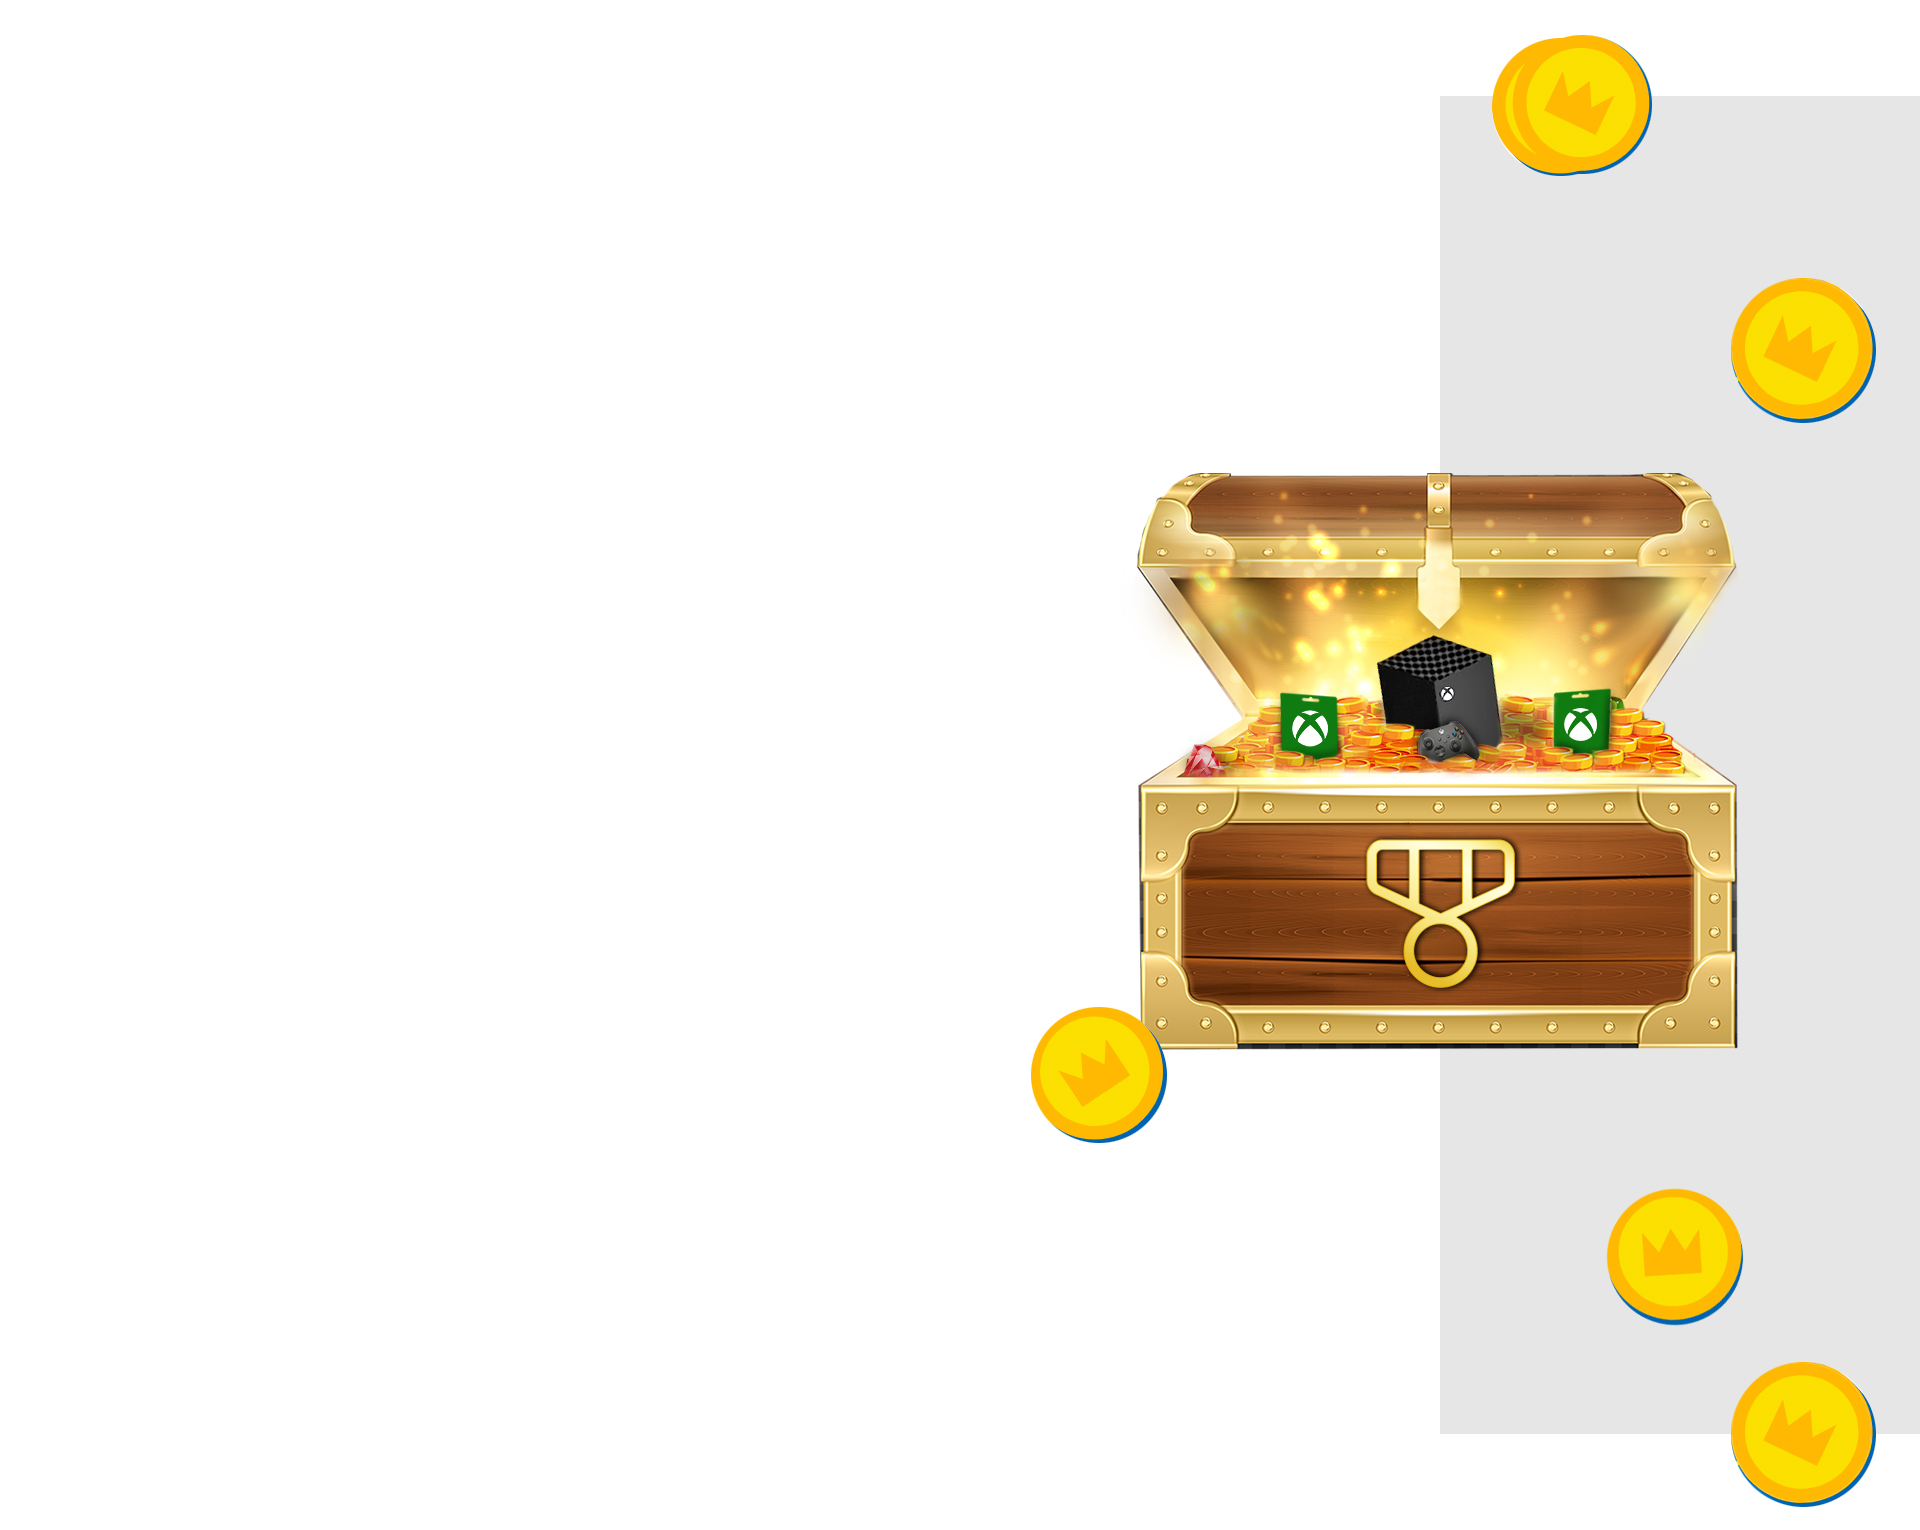 A treasure chest overflowing with coins, Xbox gift cards, an Xbox Series X console and an Xbox controller